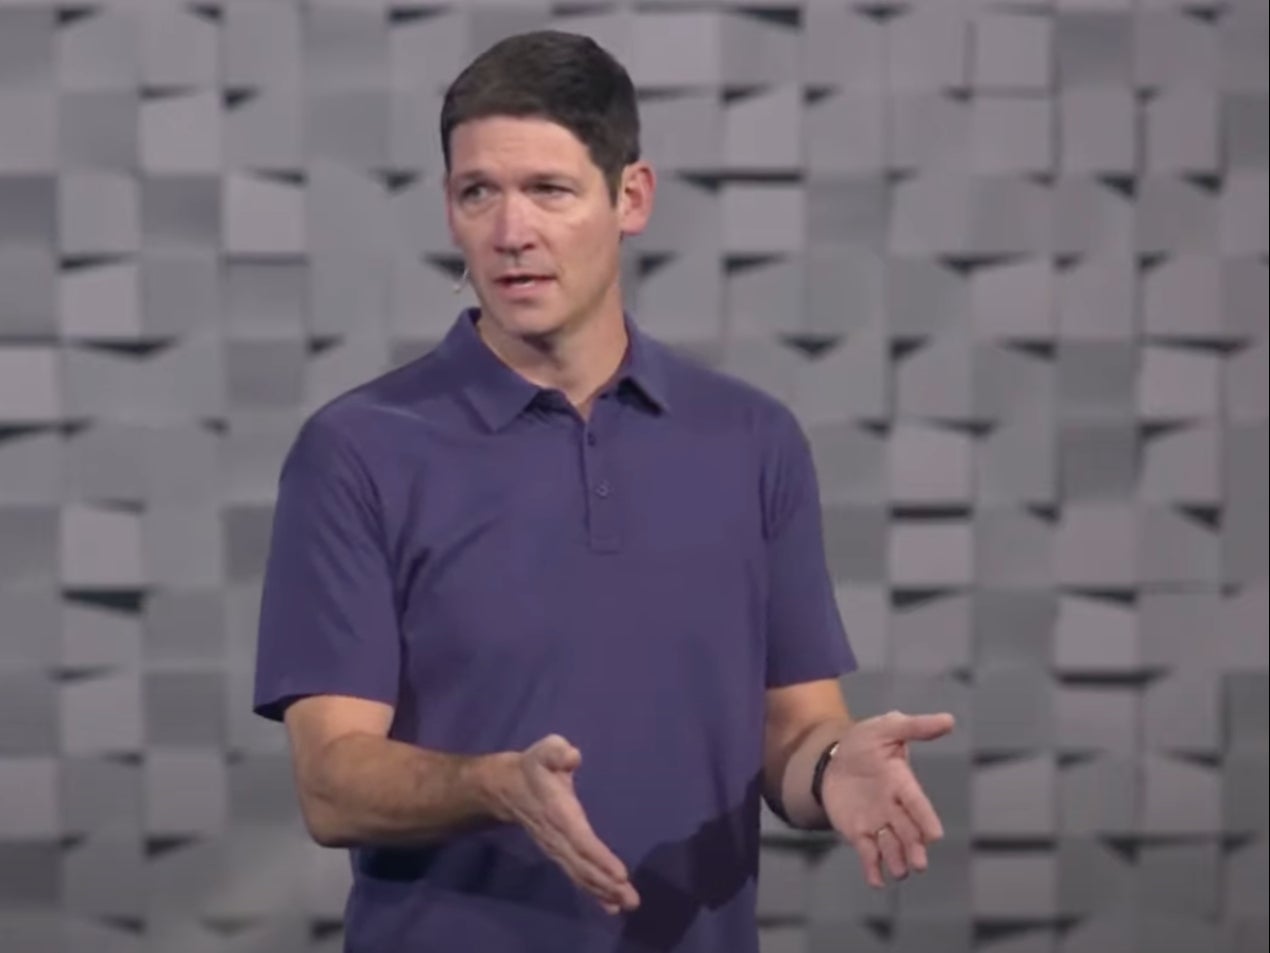 Matt Chandler, the lead pastor of The Village Church in the Dallas-Fort Worth area, has stepped down after admitted to inappropriate direct messages between himself and a woman who is not his wife